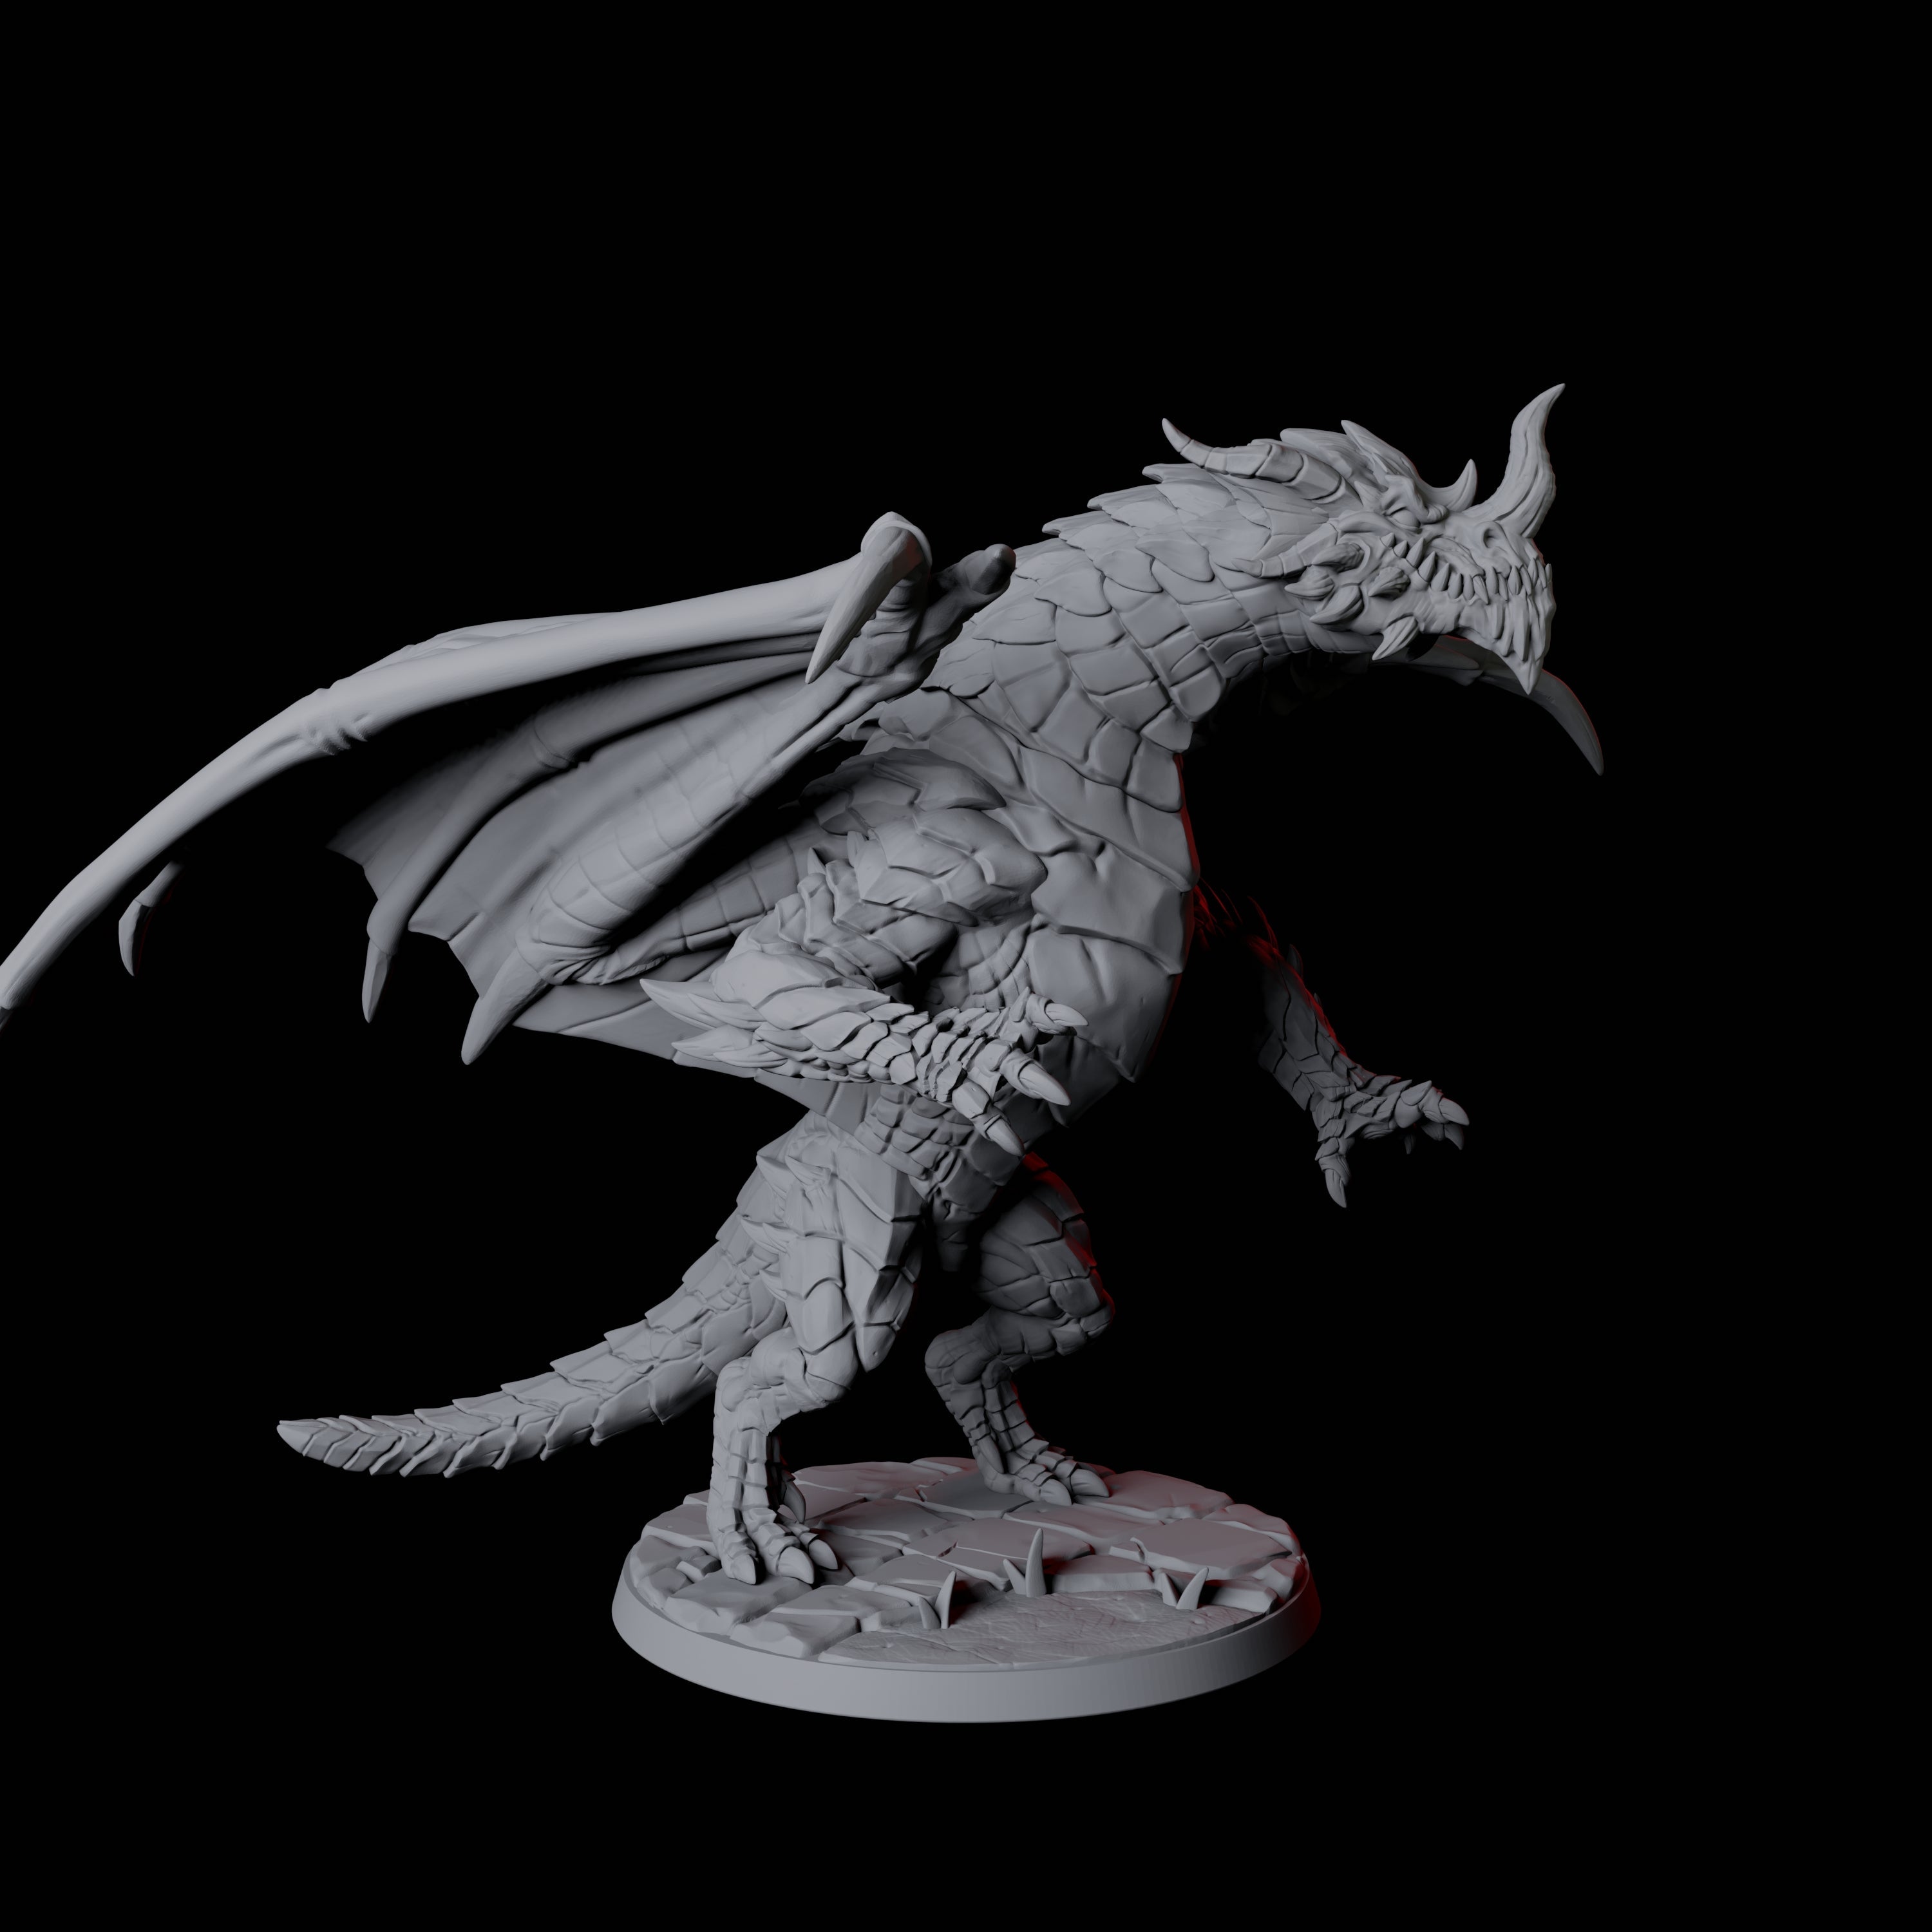 Four Chromatic Dragons Miniature for Dungeons and Dragons, Pathfinder or other TTRPGs